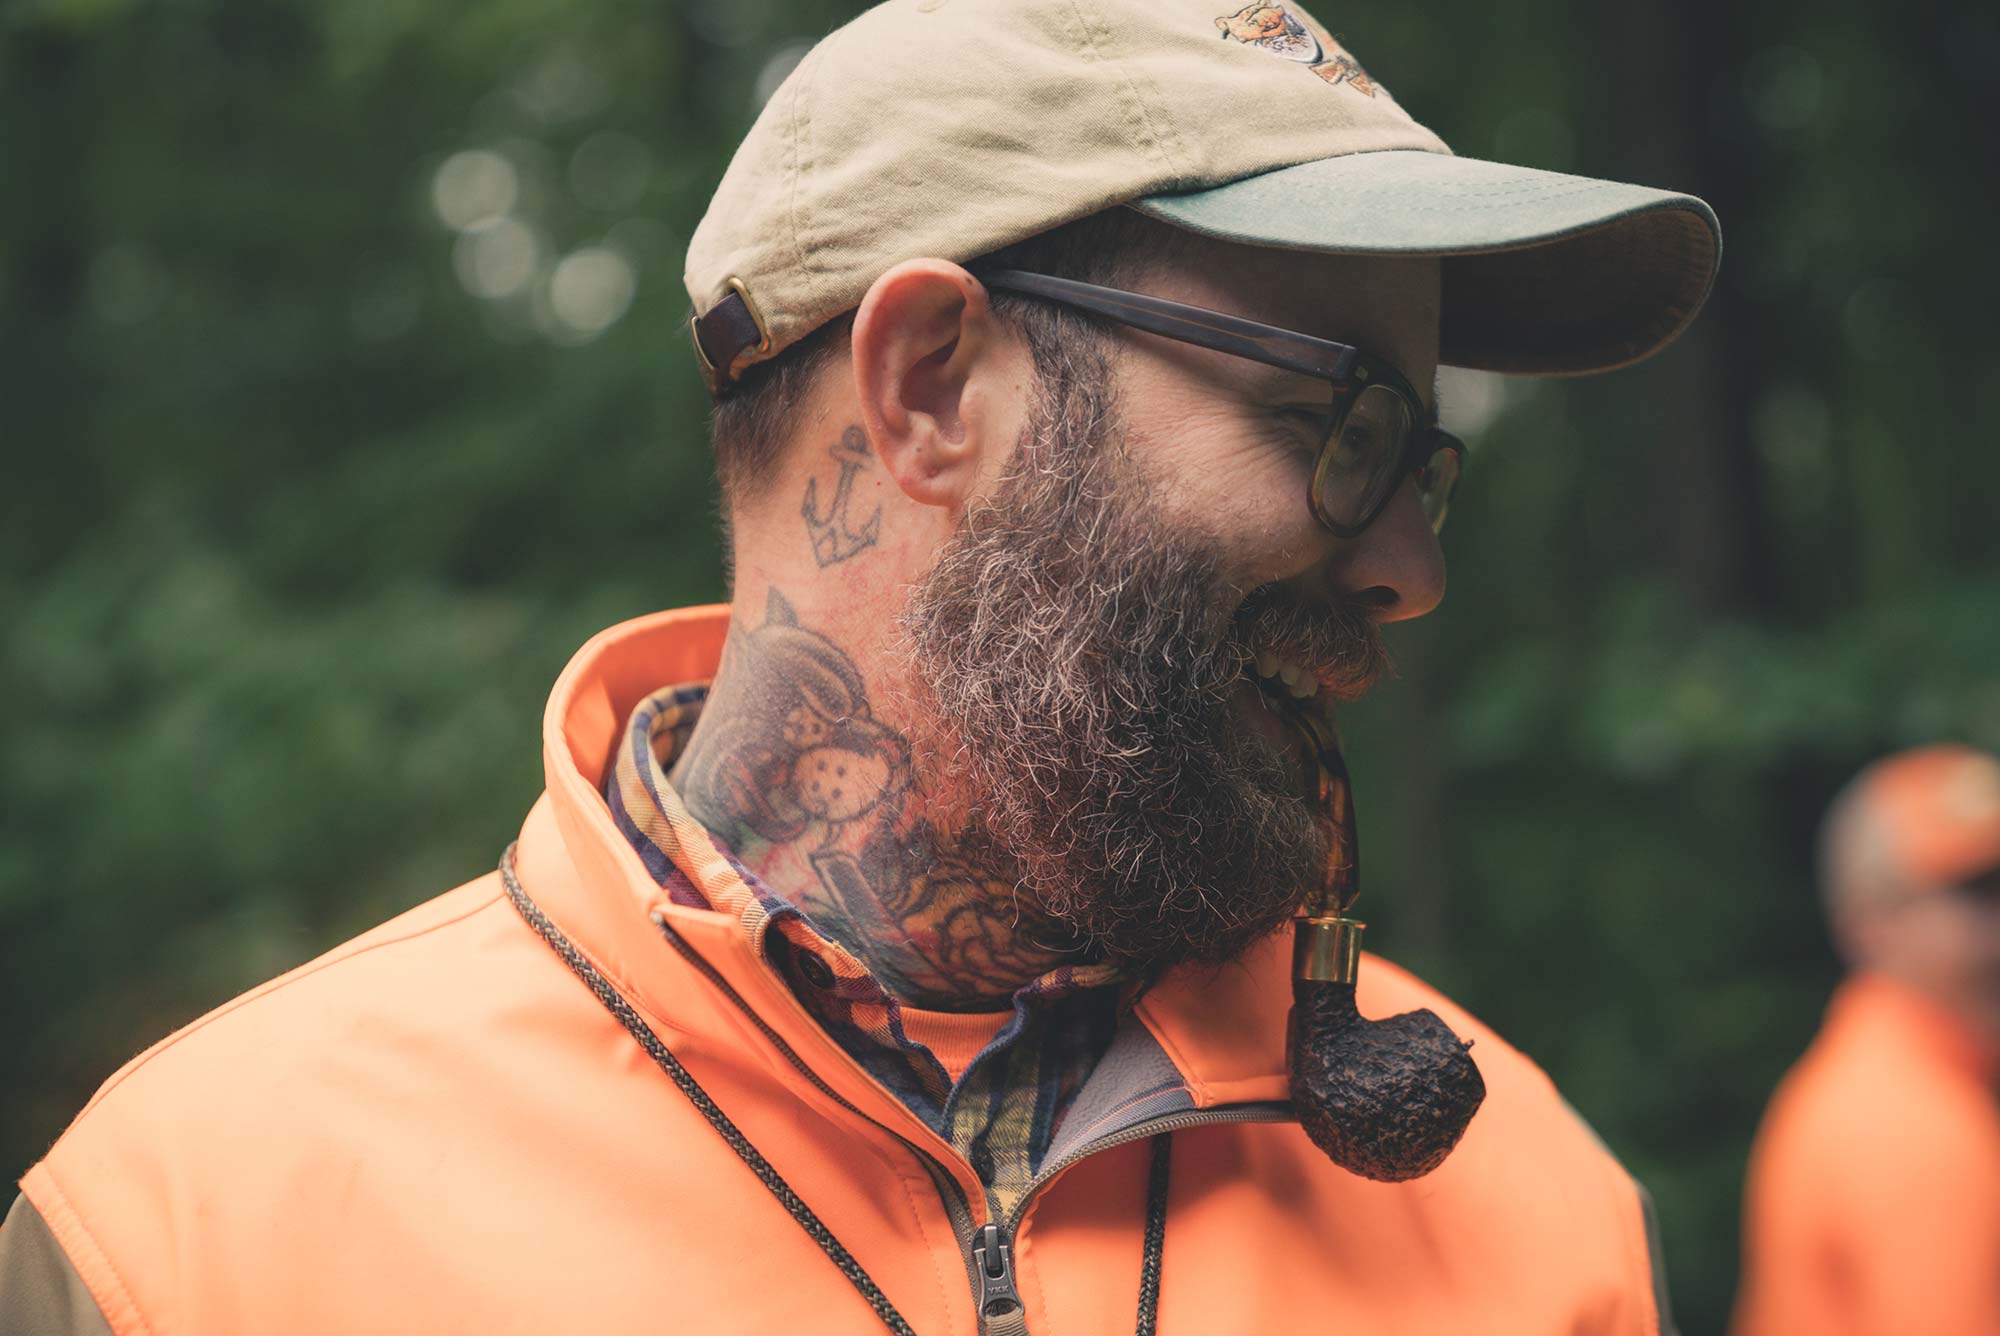 Jay Dowd, tattoos and all, is a prime example of where upland hunting is headed.